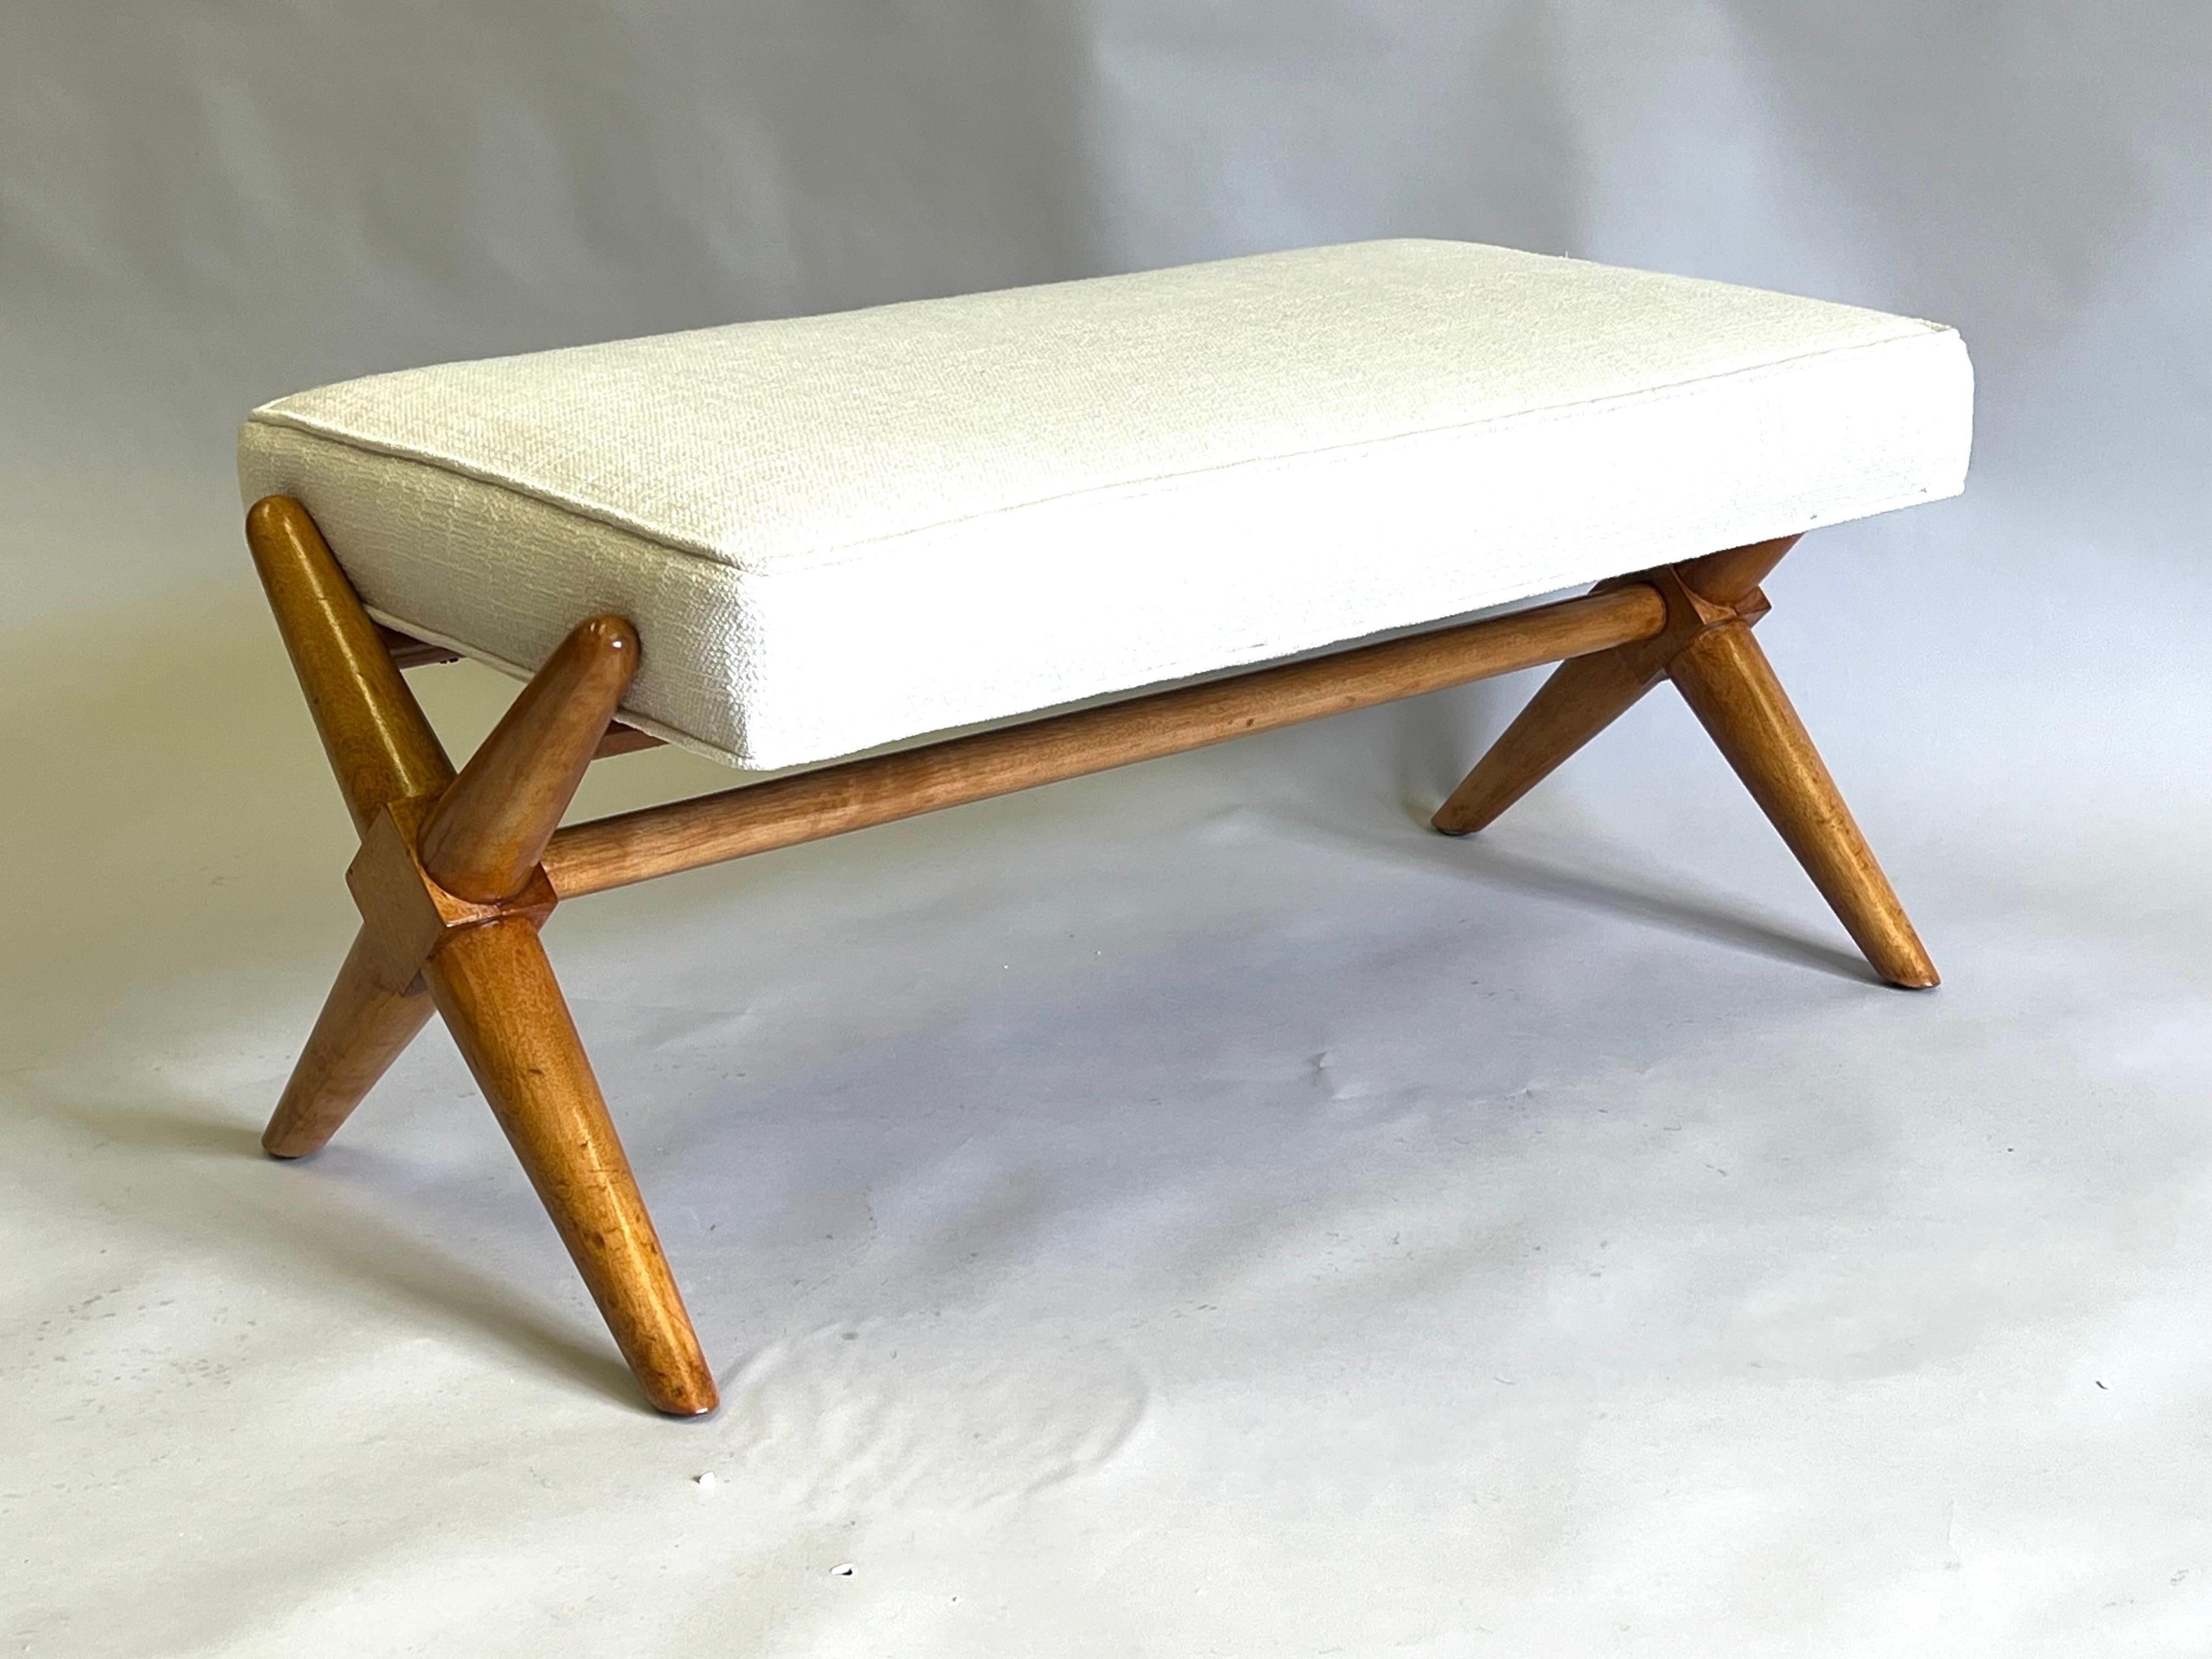 Upholstery Mid-Century Modern Neoclassical Hardwood Bench in the style of Jean-Michel Frank